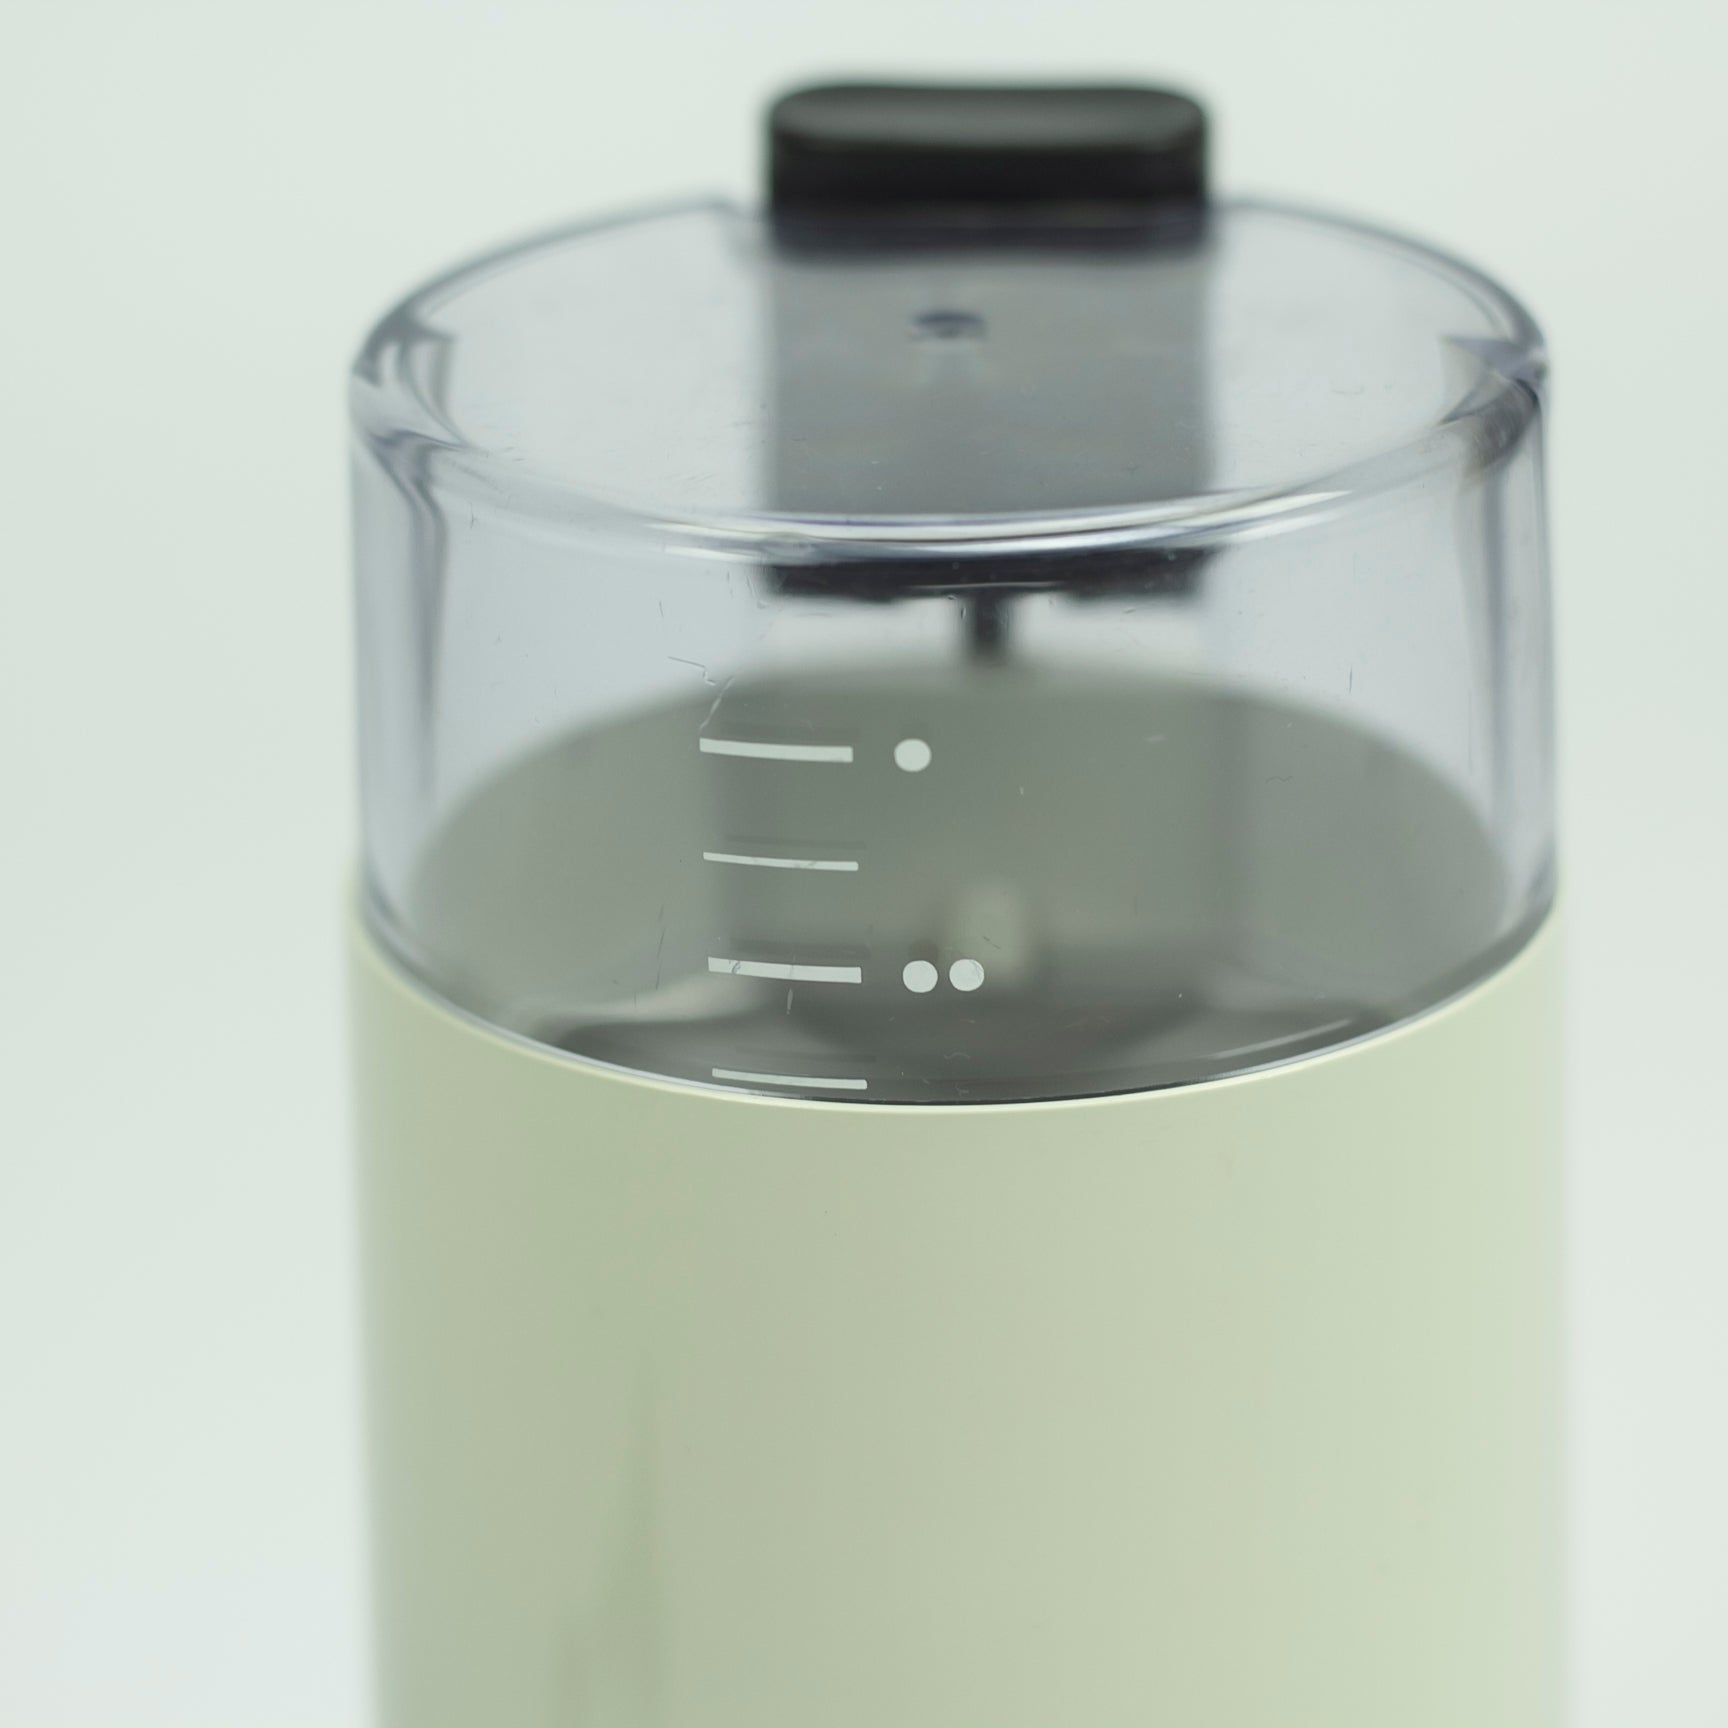 Braun Coffee Grinder, Designed by Dieter Rams - type 4041 from 1979 –  MicroscopeTelescope